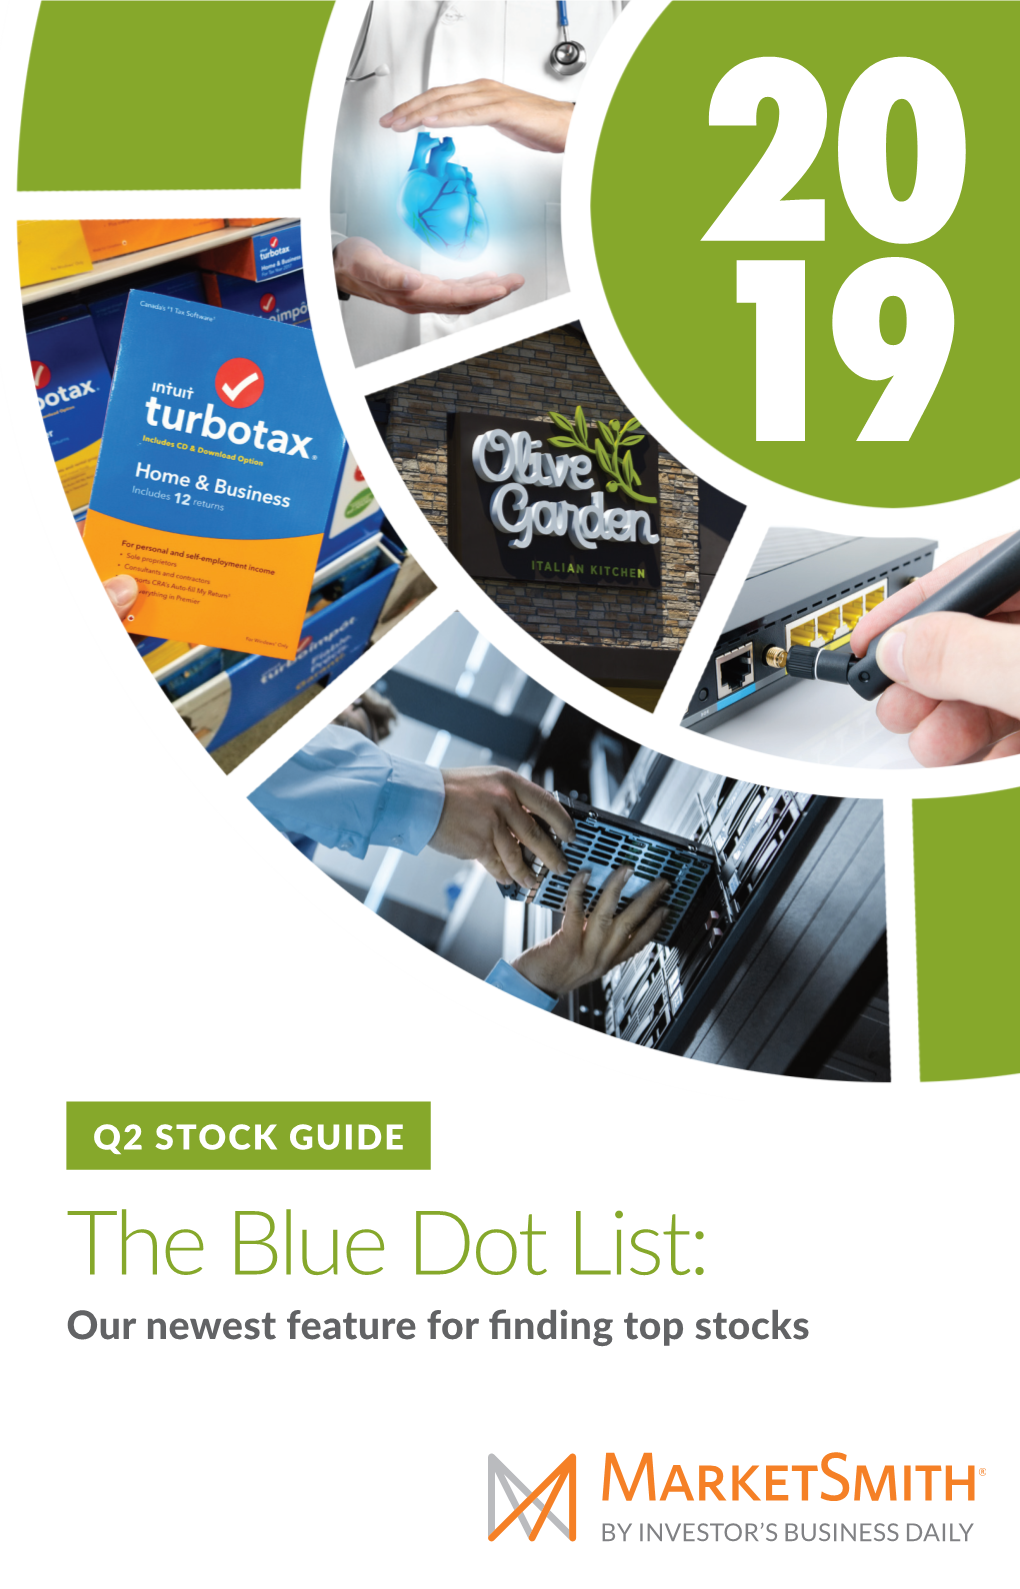 The Blue Dot List: Our Newest Feature for Finding Top Stocks